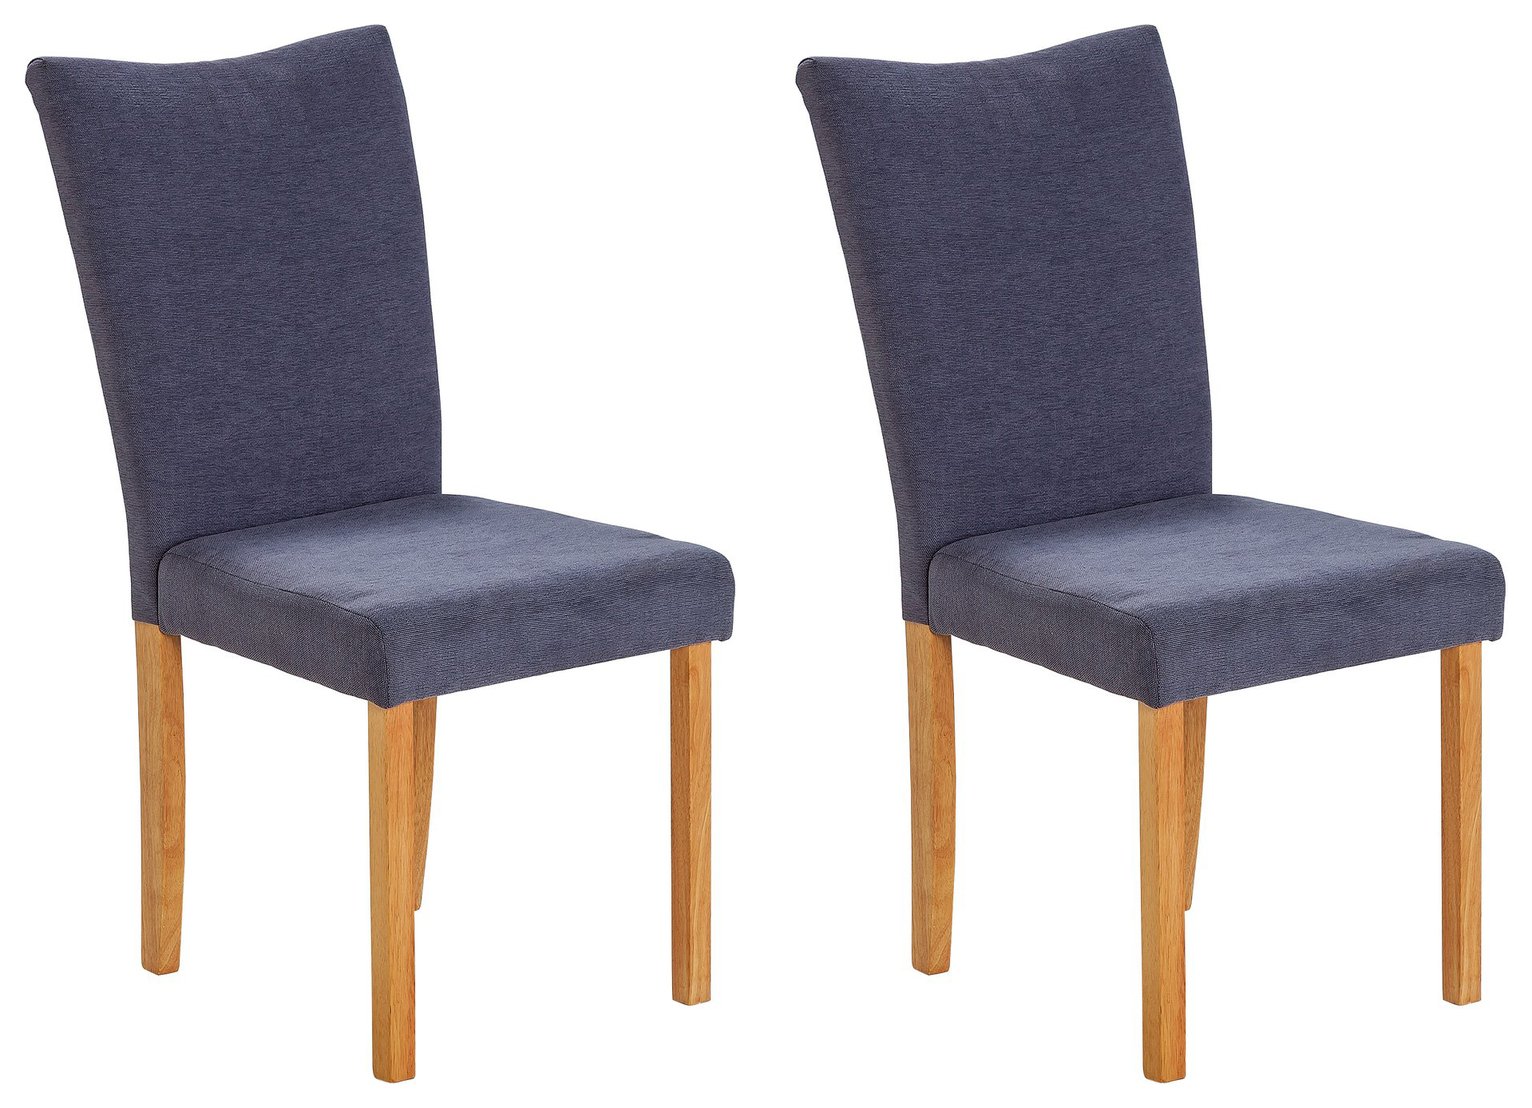 Argos Home Tabitha Pair of Wing Back Dining Chairs - Grey